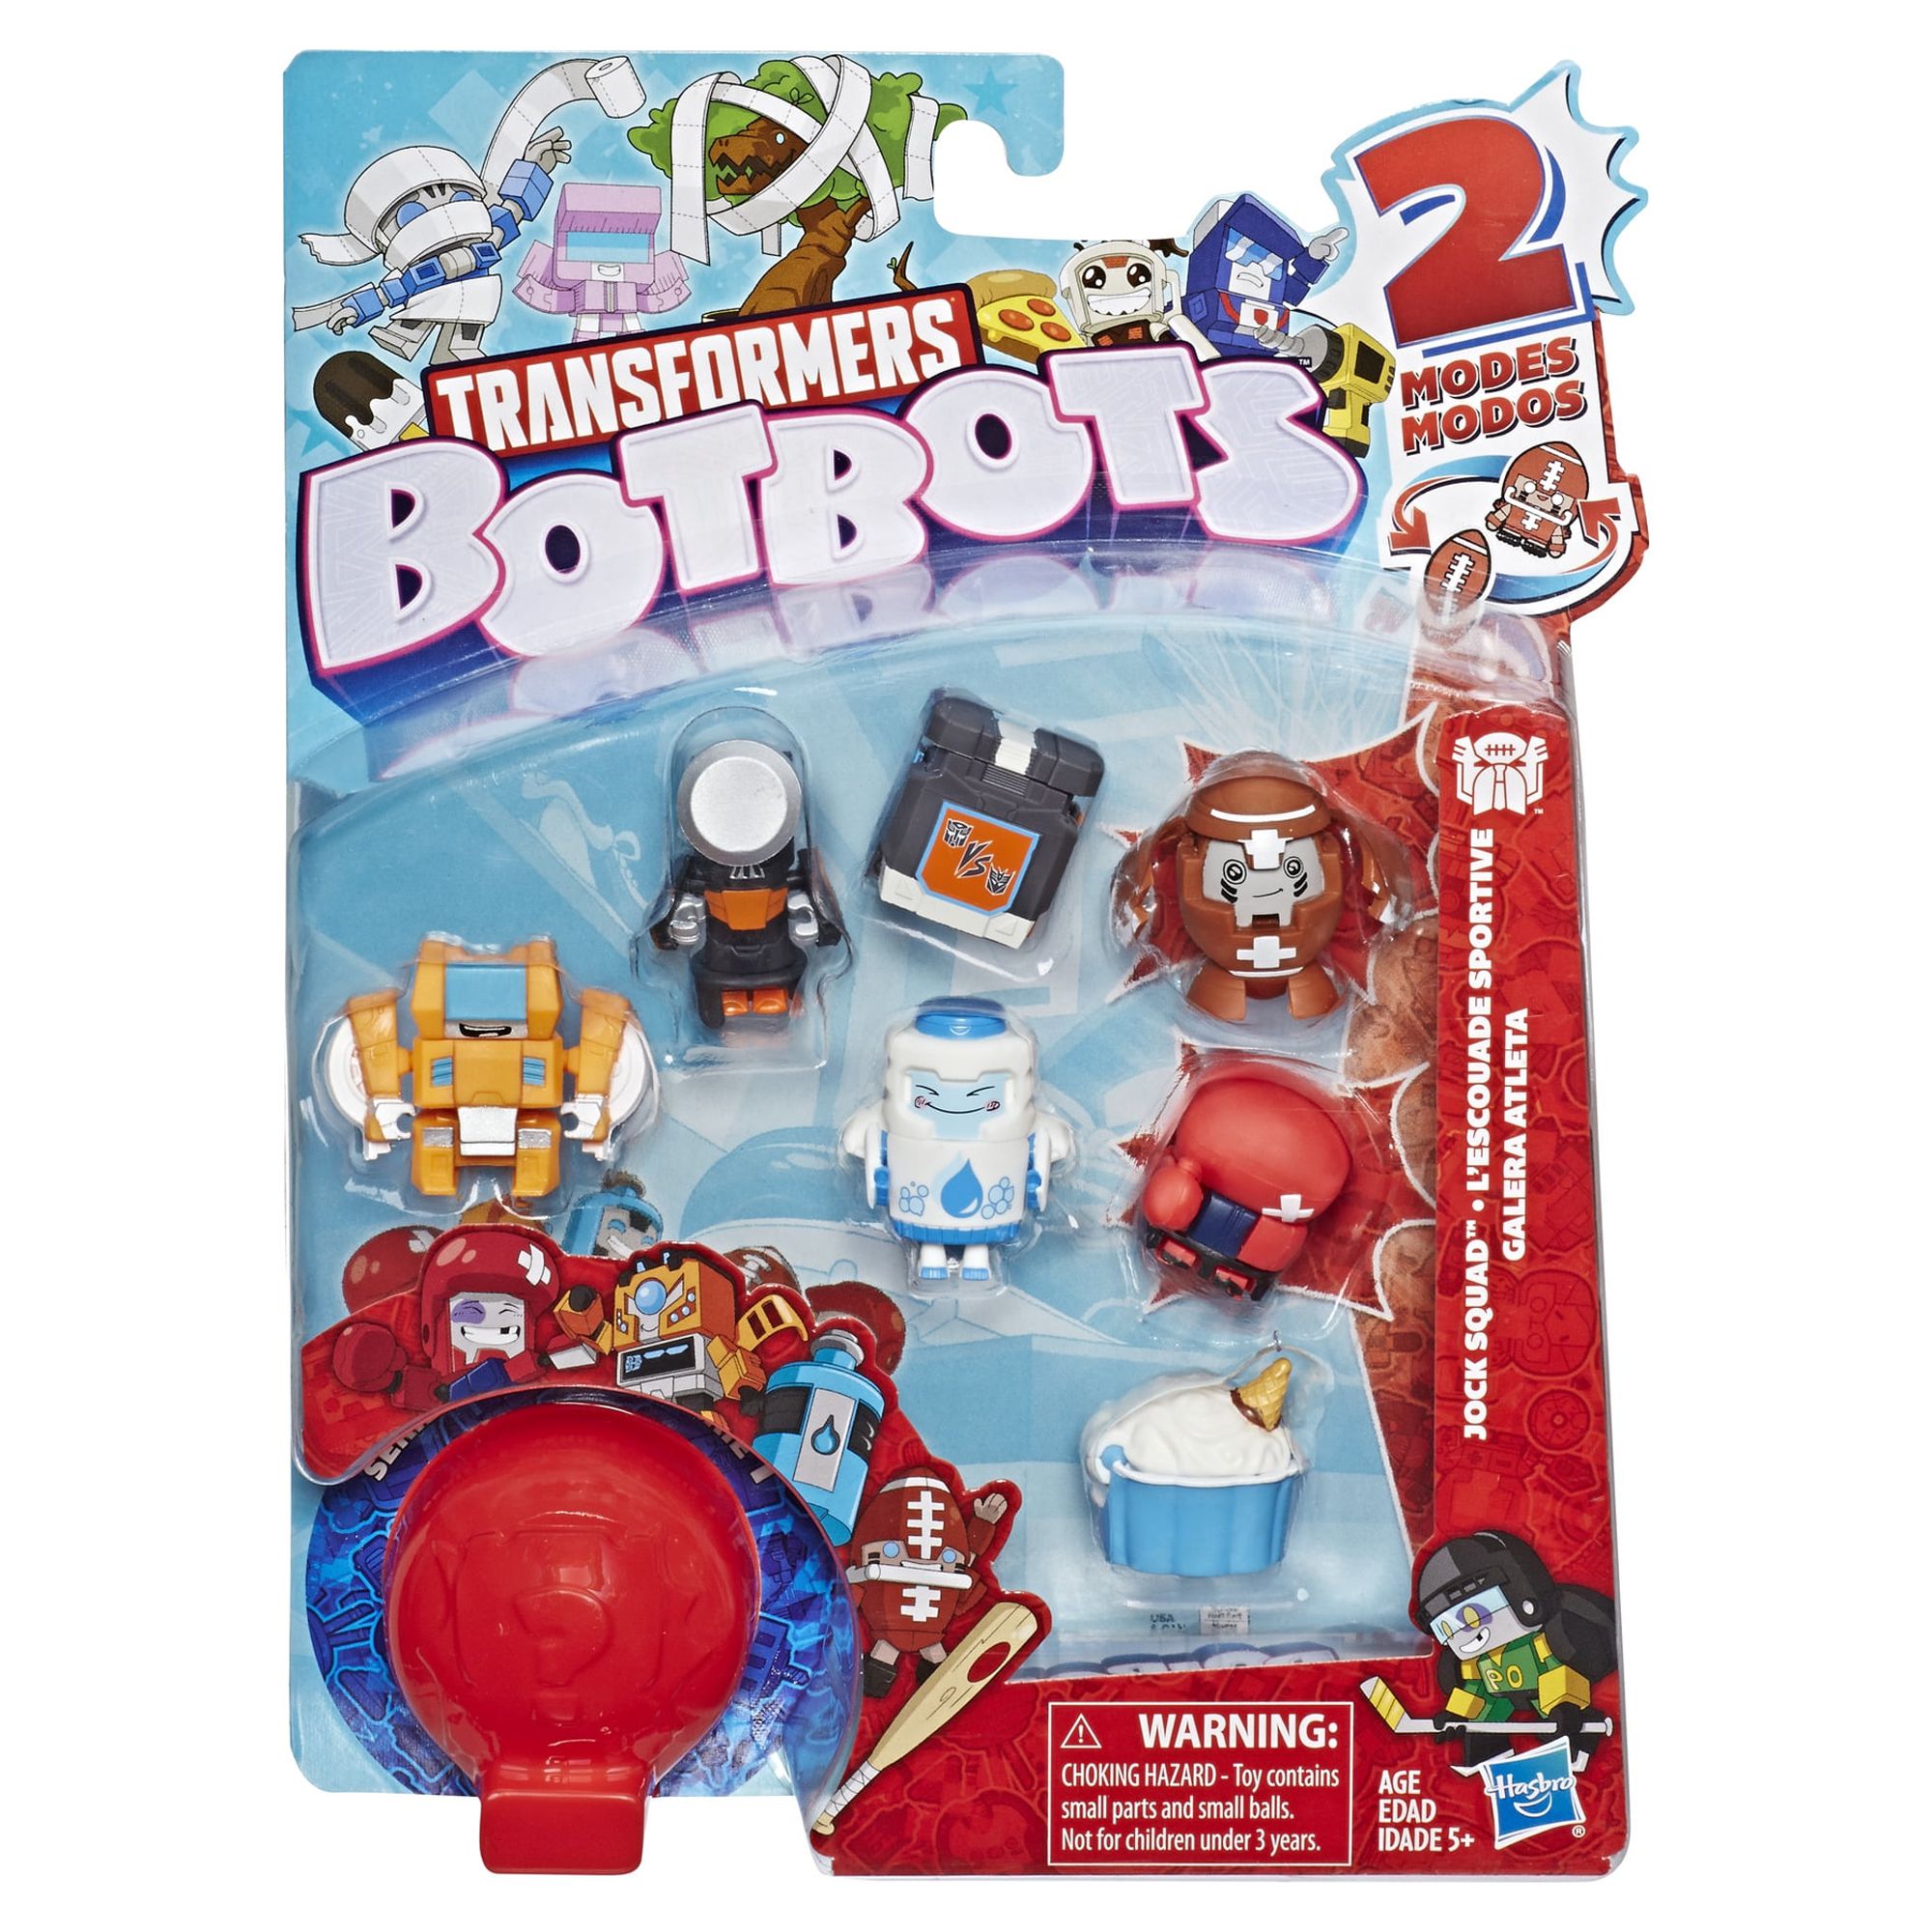 Transformers BotBots Toys Series 1 Jock Squad 8-Pack Collectible Figures - image 1 of 5